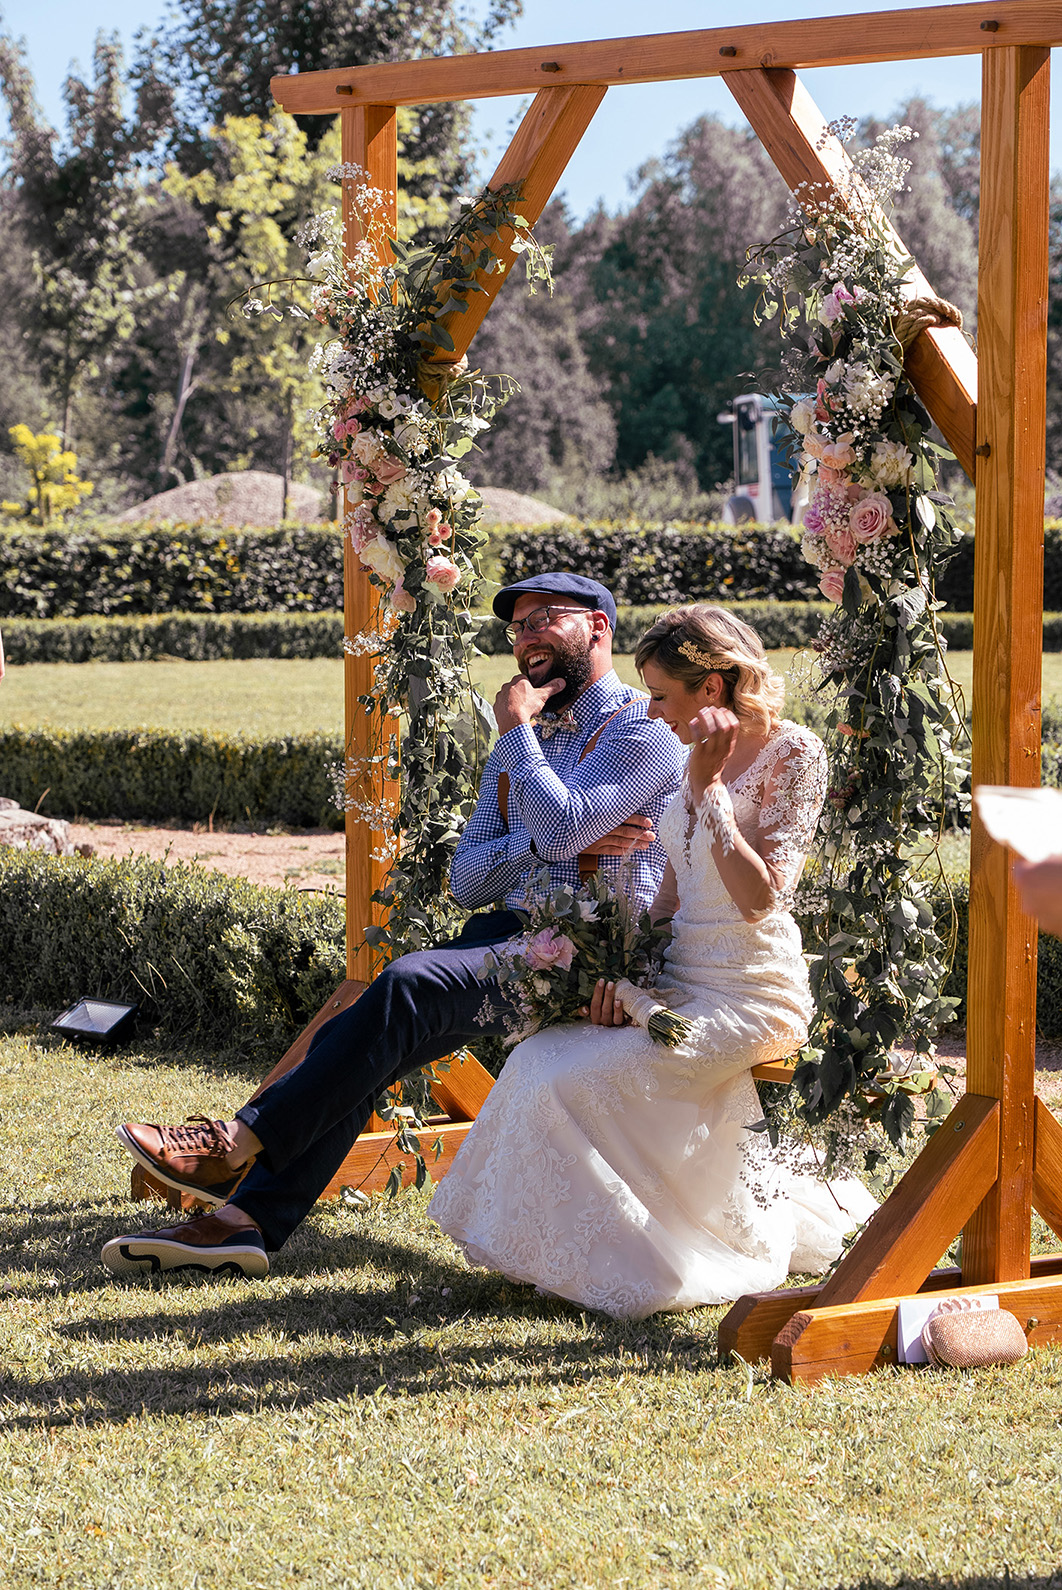 A married couple sitting on a wooden swing